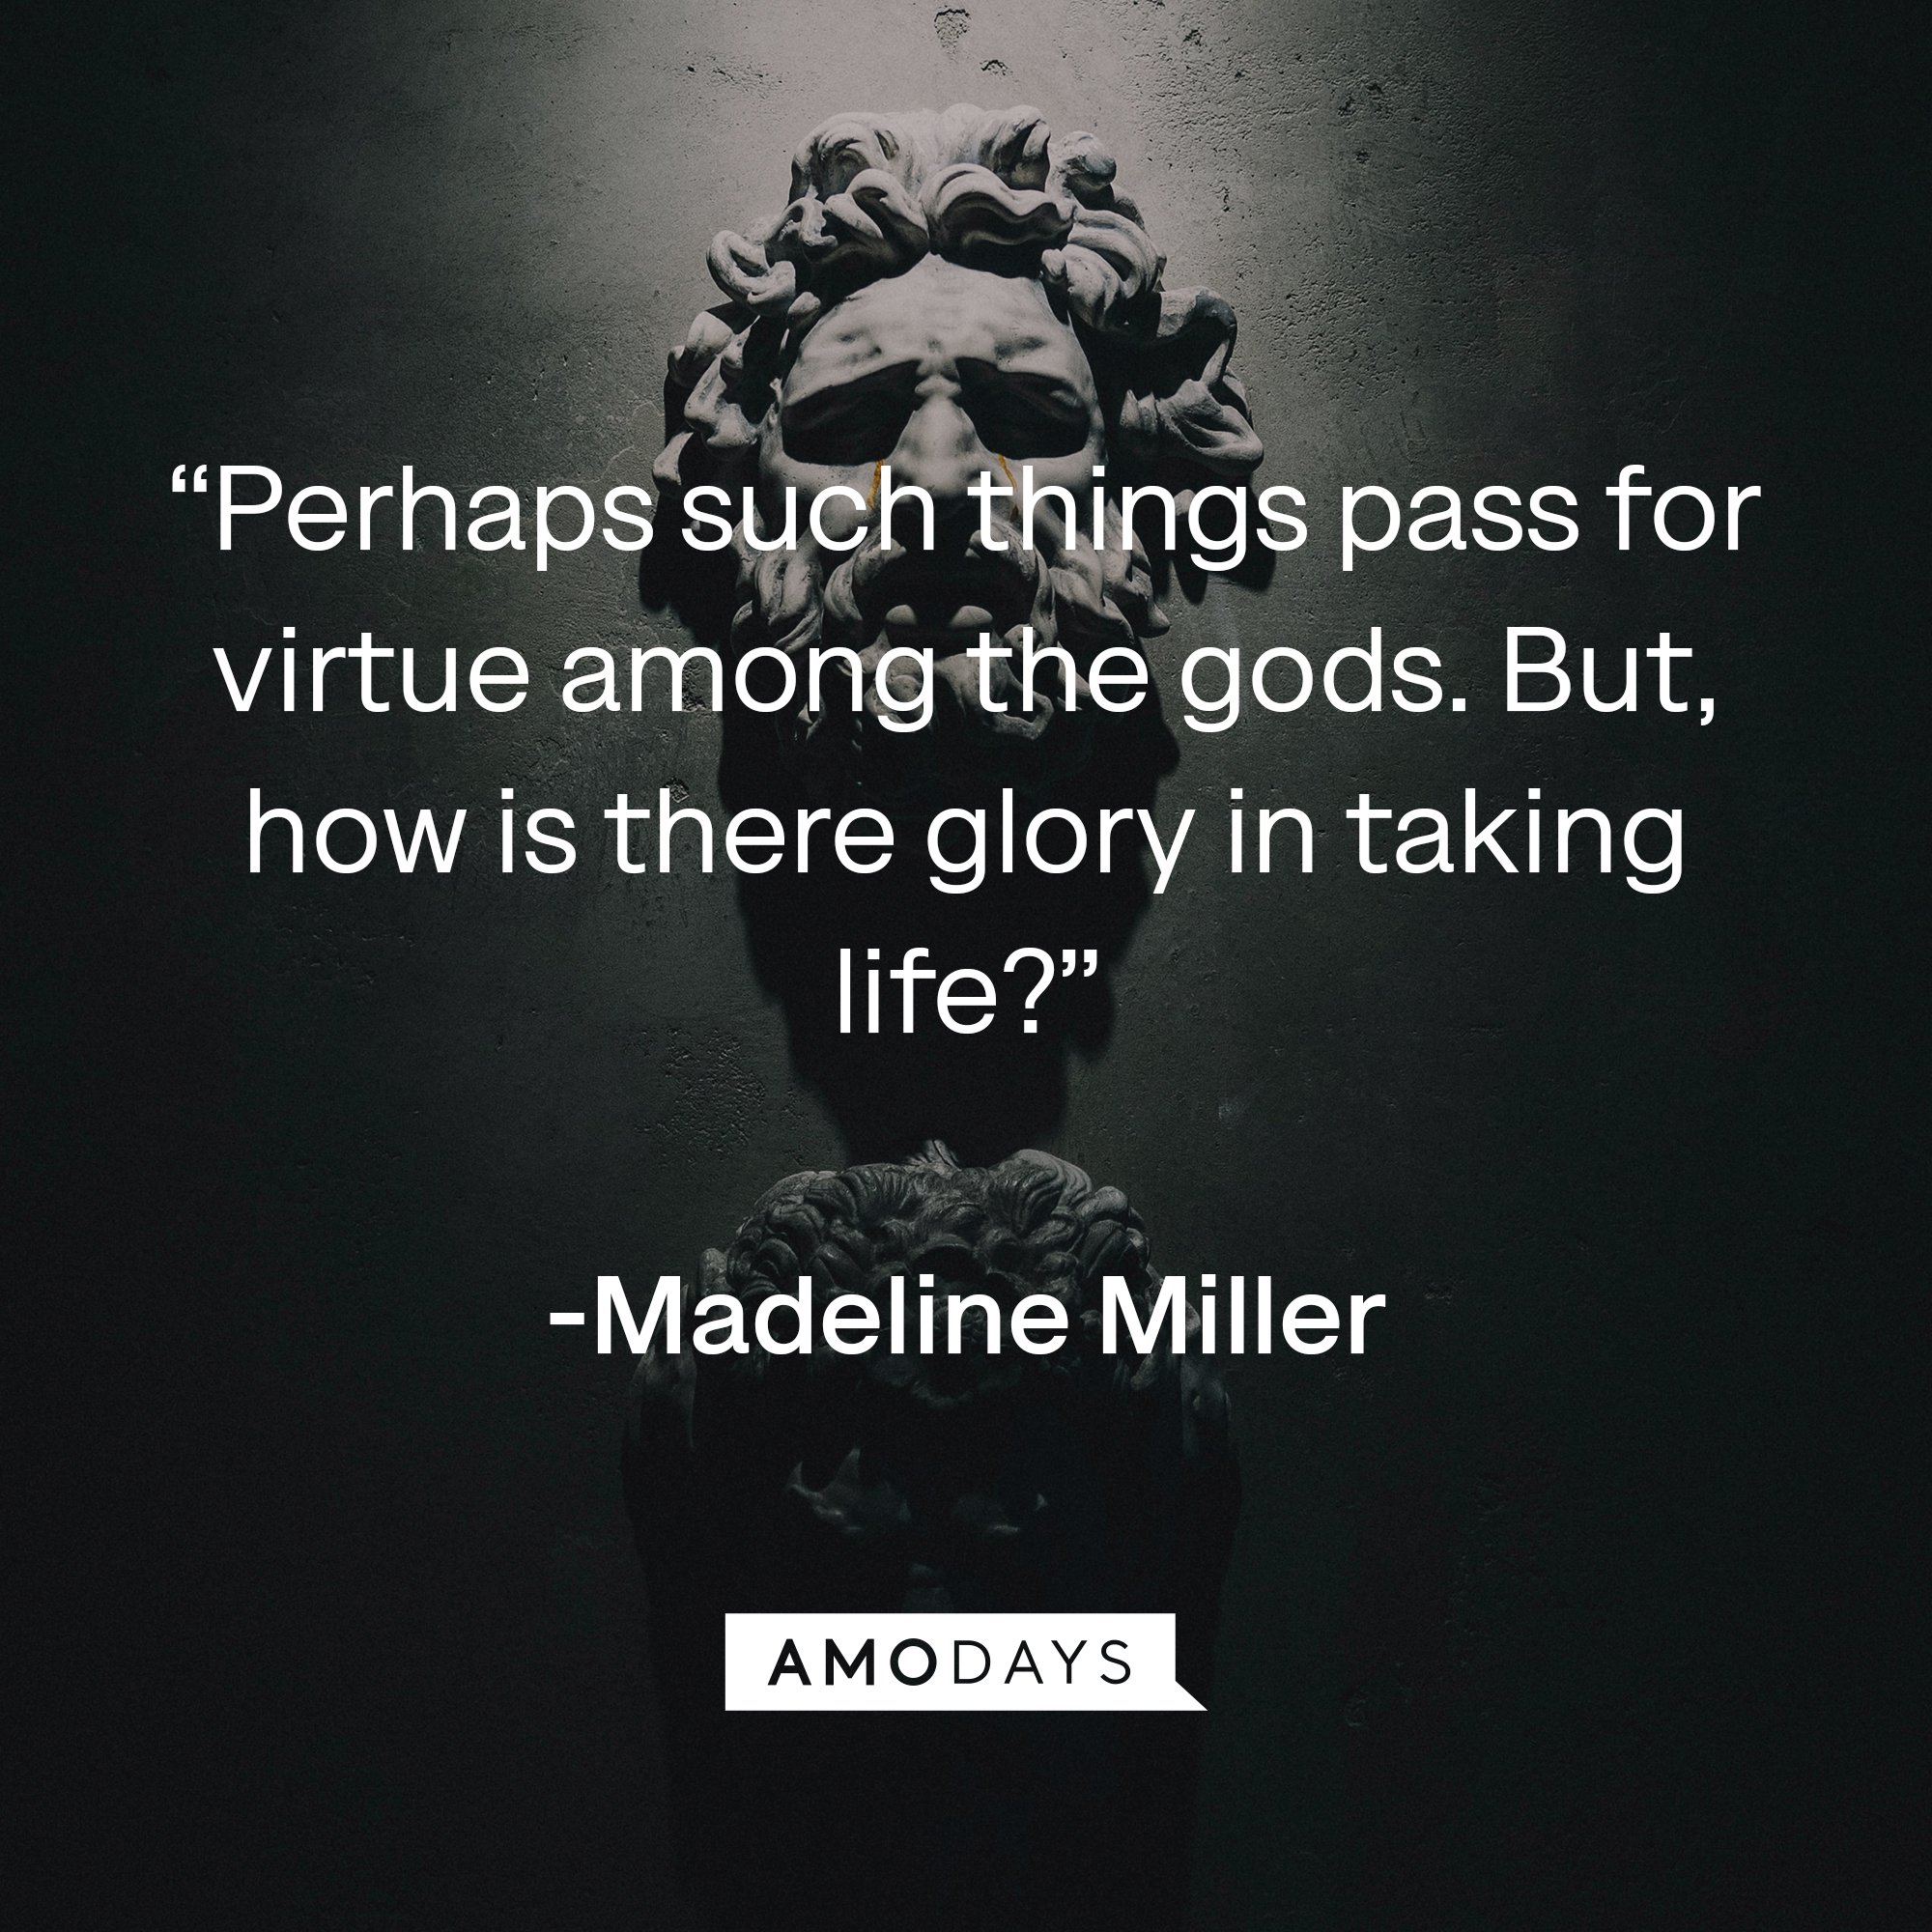  Madeline Miller's quote: “Perhaps such things pass for virtue among the gods. But, how is there glory in taking life?” | Image: AmoDays